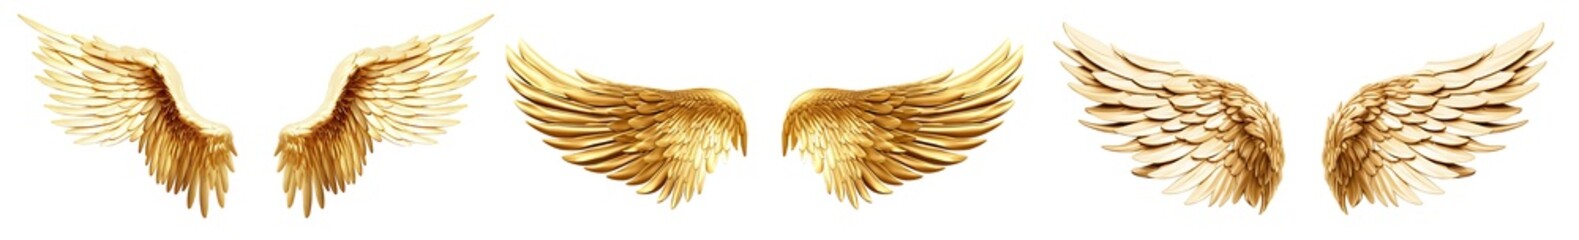 Set of golden wings cut out